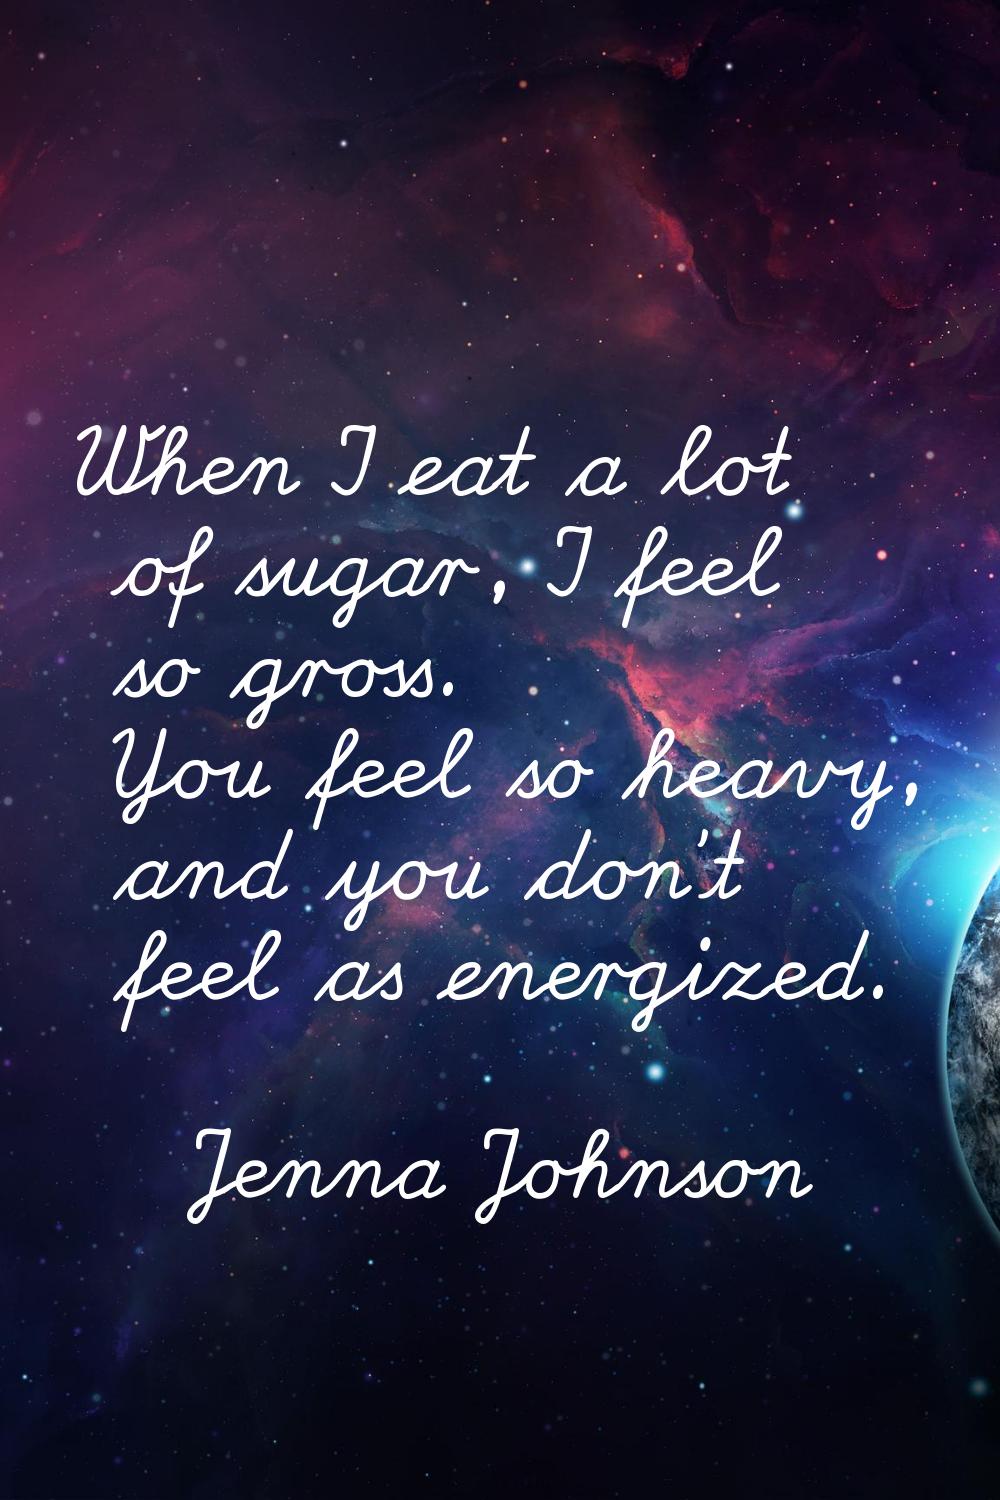 When I eat a lot of sugar, I feel so gross. You feel so heavy, and you don’t feel as energized.